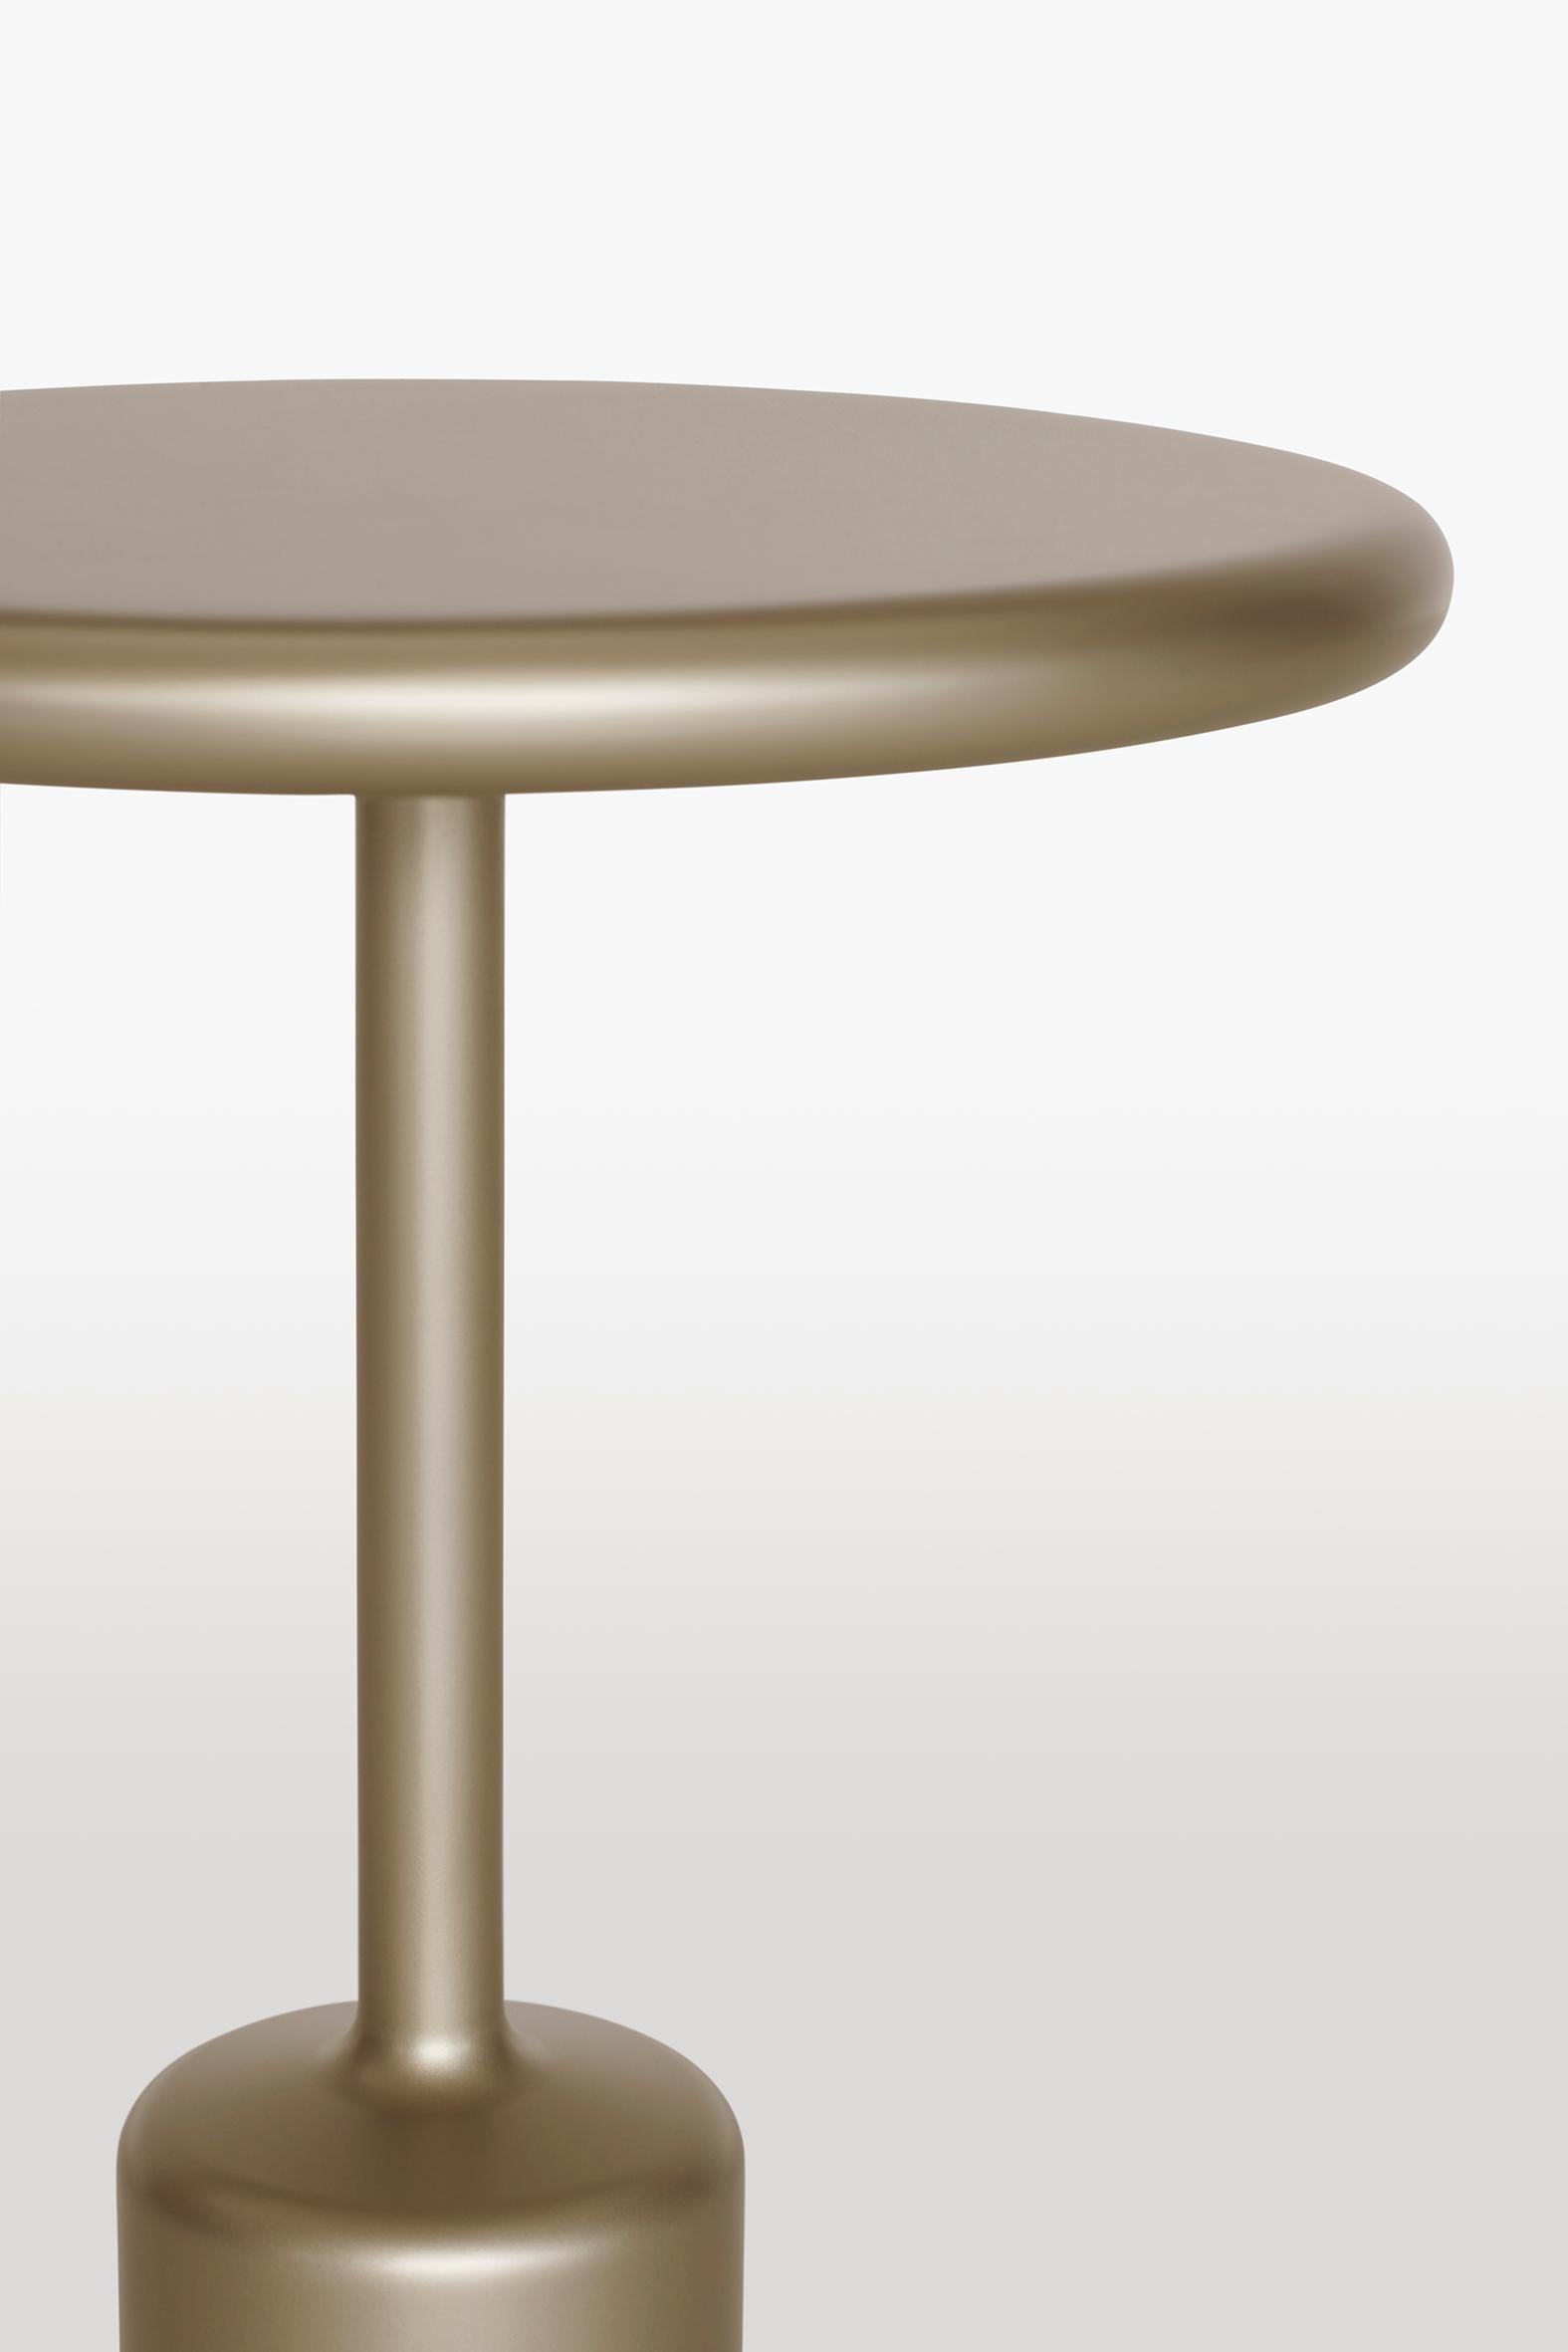 Tavolotto is a set of 3 tables, same look, different proportions. Side table, center low table, accessory table. Tavolotto appears monolithic, almost as if it were made of a single block, though it is not. It is welded, then polished so perfectly